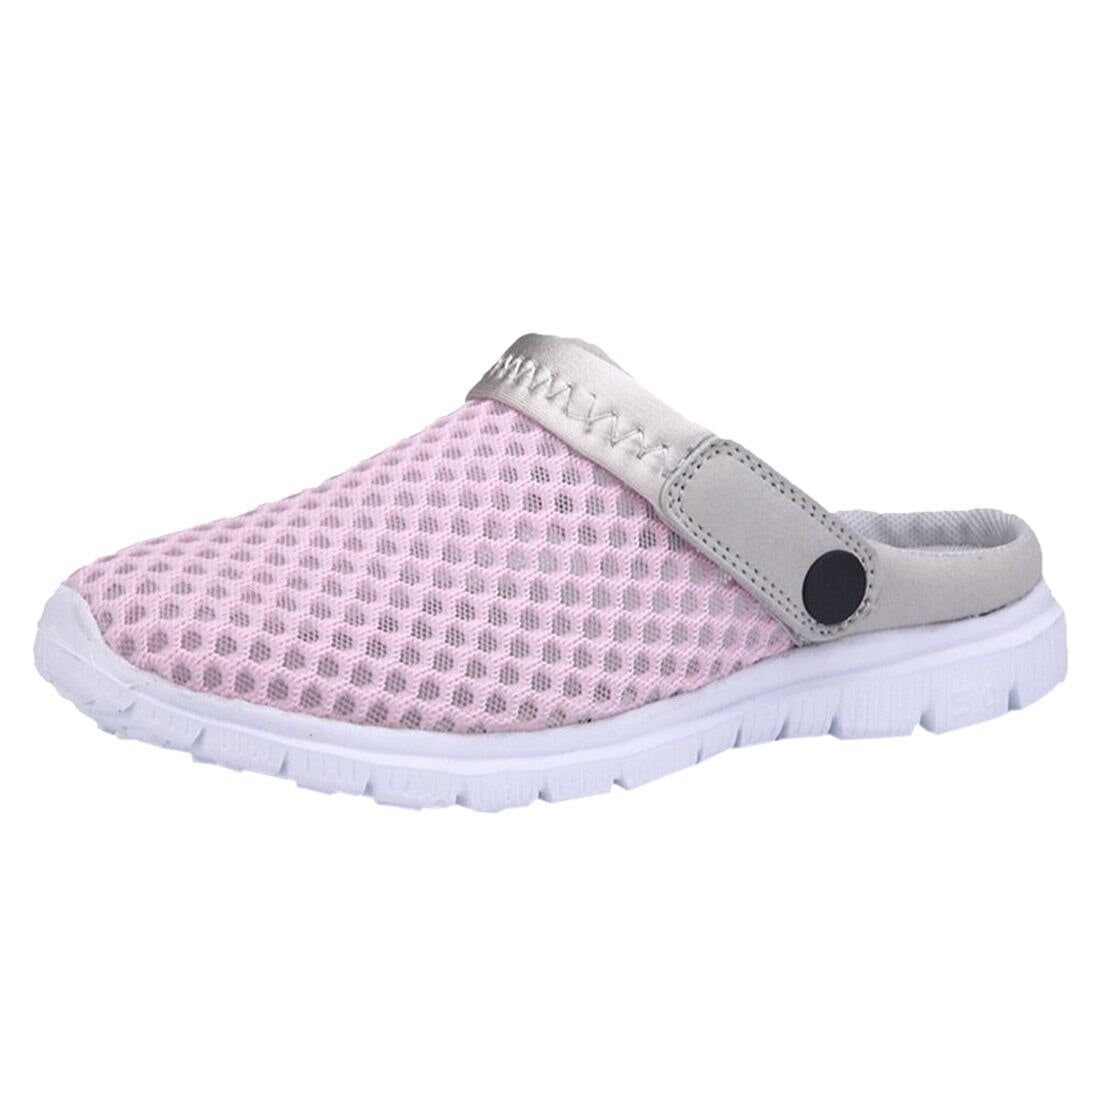 2018 Summer Shoes Fashion Women mesh cloth Slippers Female Hollow Out Flats Women Rubber Sandals Flat Shoes - ebowsos